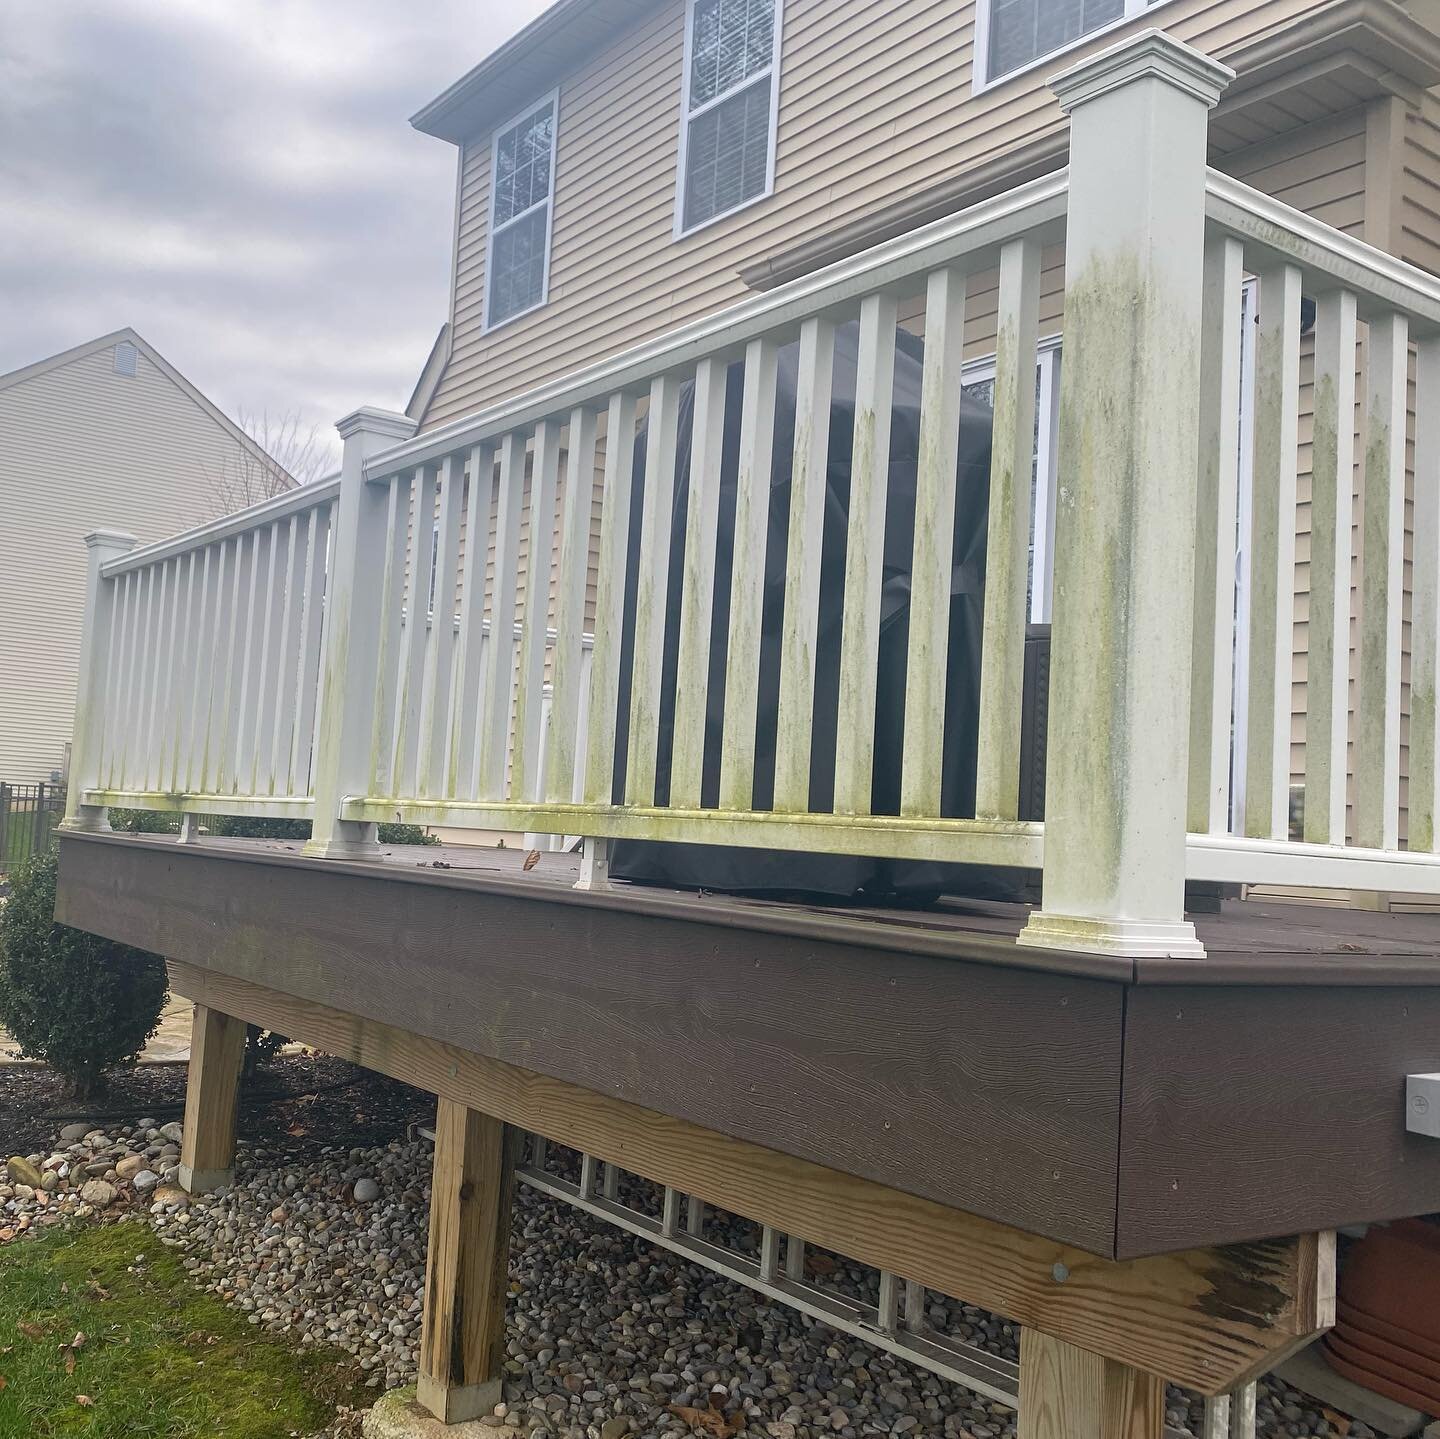 Keeping your trex deck clean can be a pain if you don&rsquo;t have the tome or tools. Hire a professional! Call 908-343-7005 or book online at www.aboveandbeyondcleanllc.com